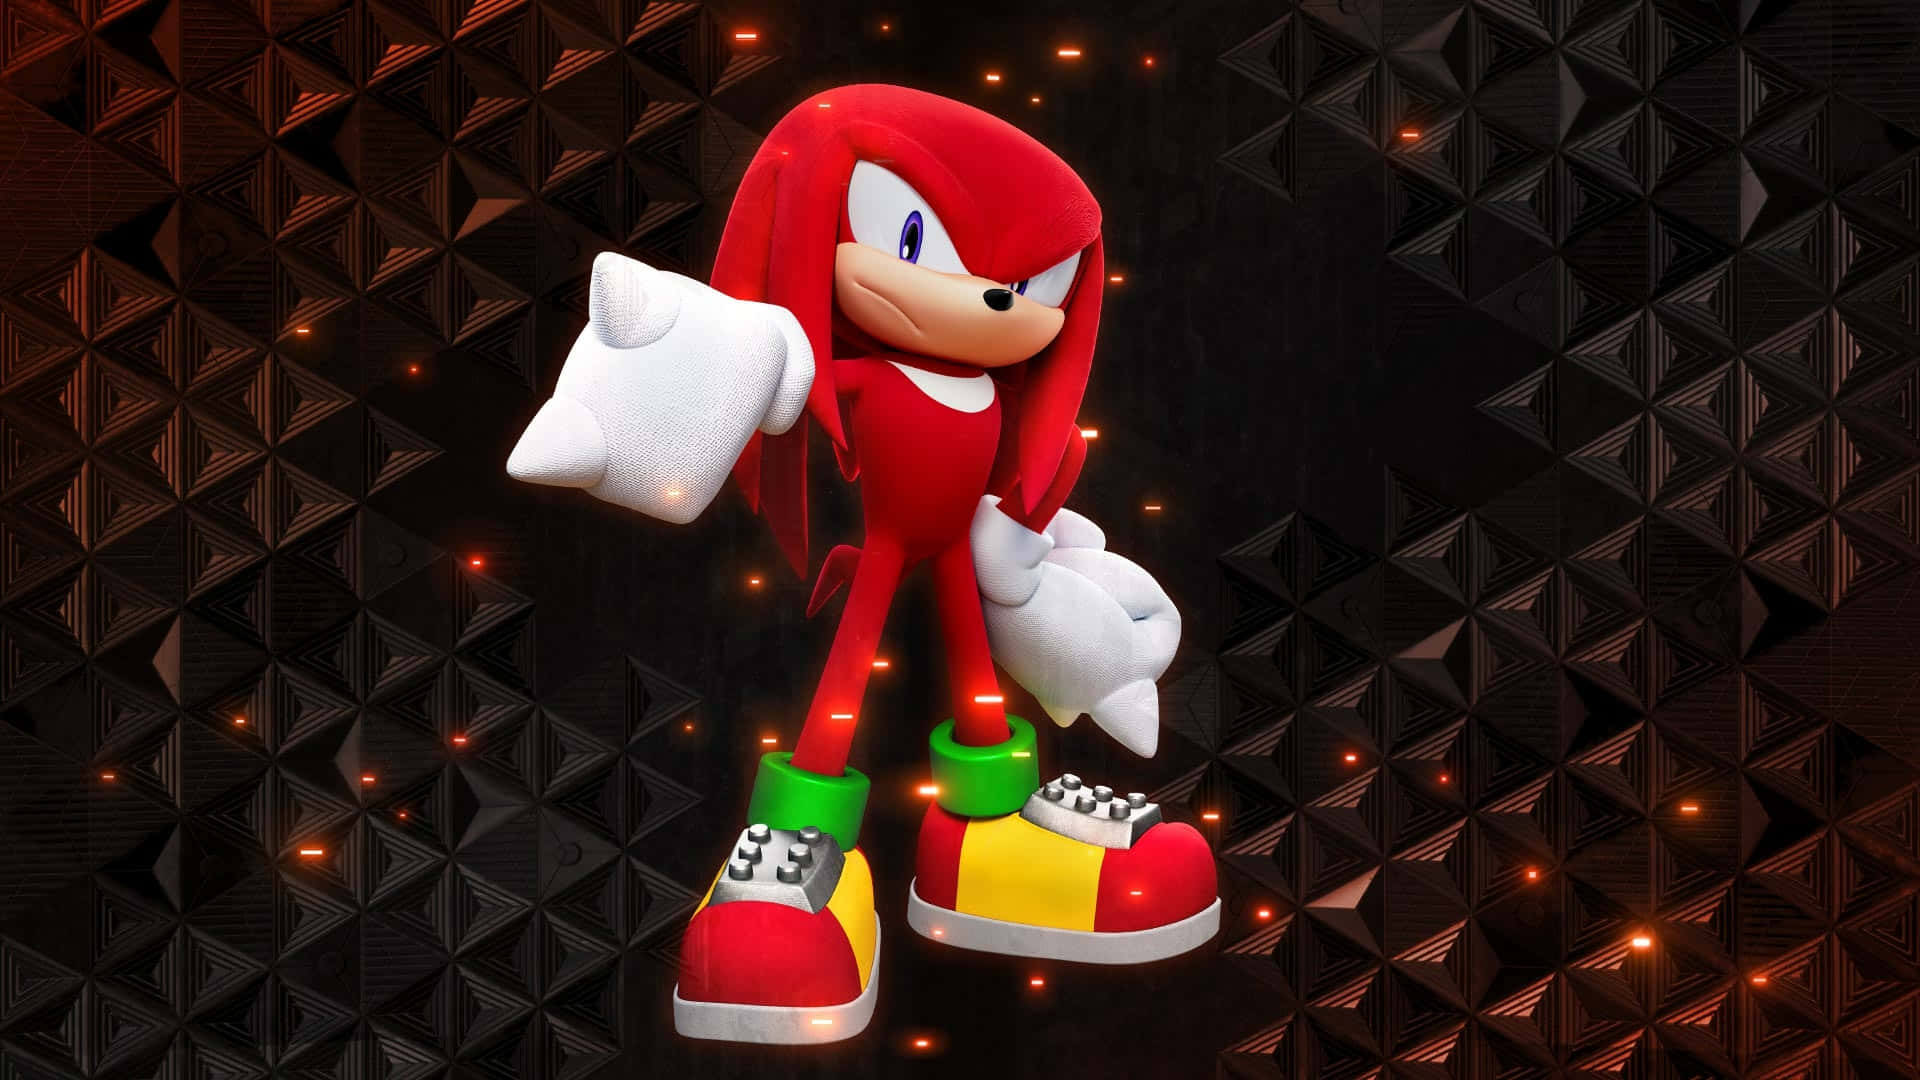 'knuckles The Echidna From The Sonic The Hedgehog Franchise'